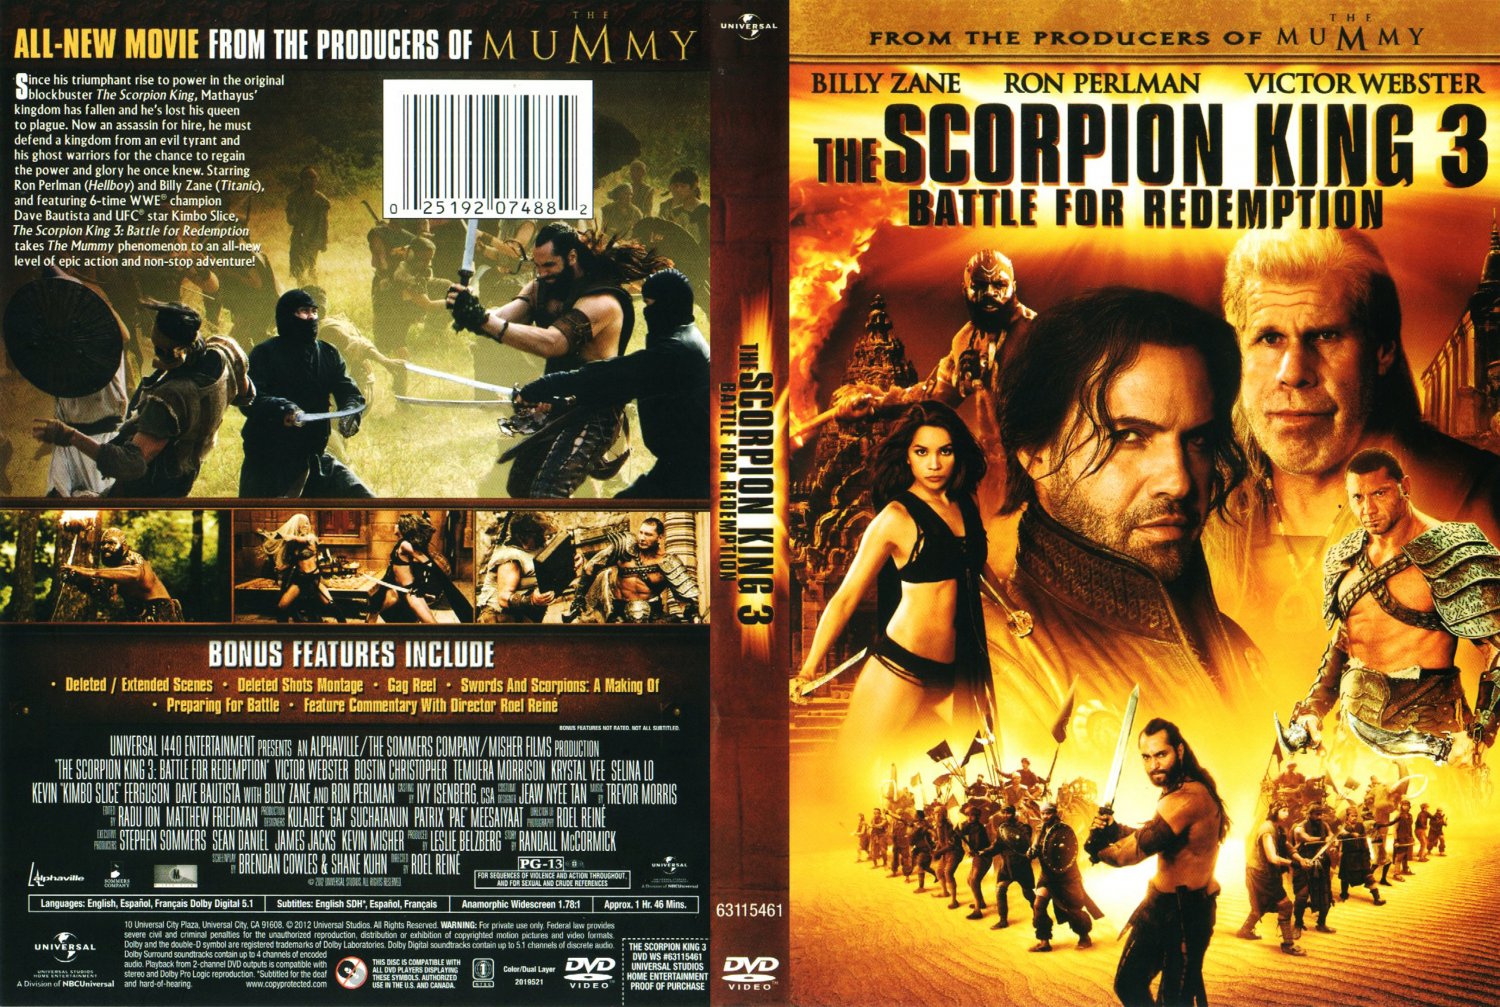 The Scorpion King 3 Battle For Redemption